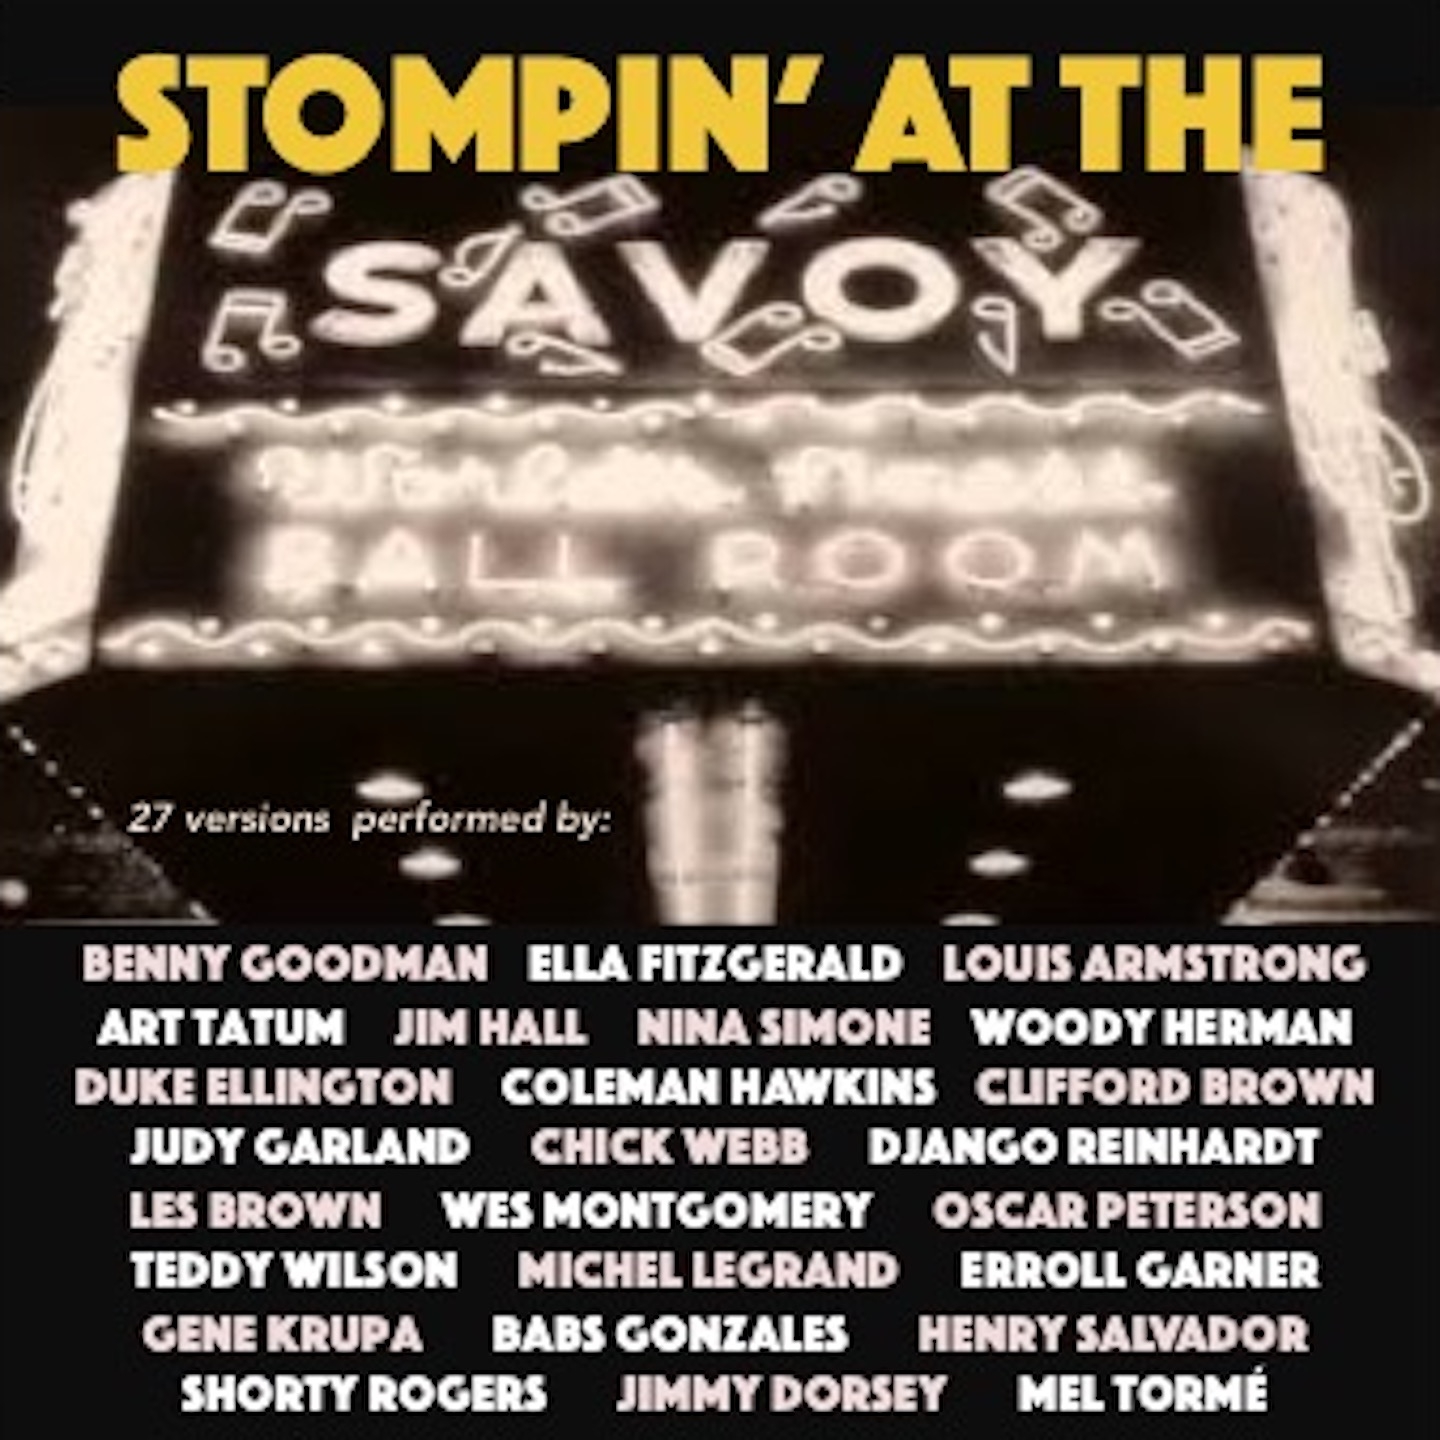 Stompin' At The Savoy (Chicago 1953)